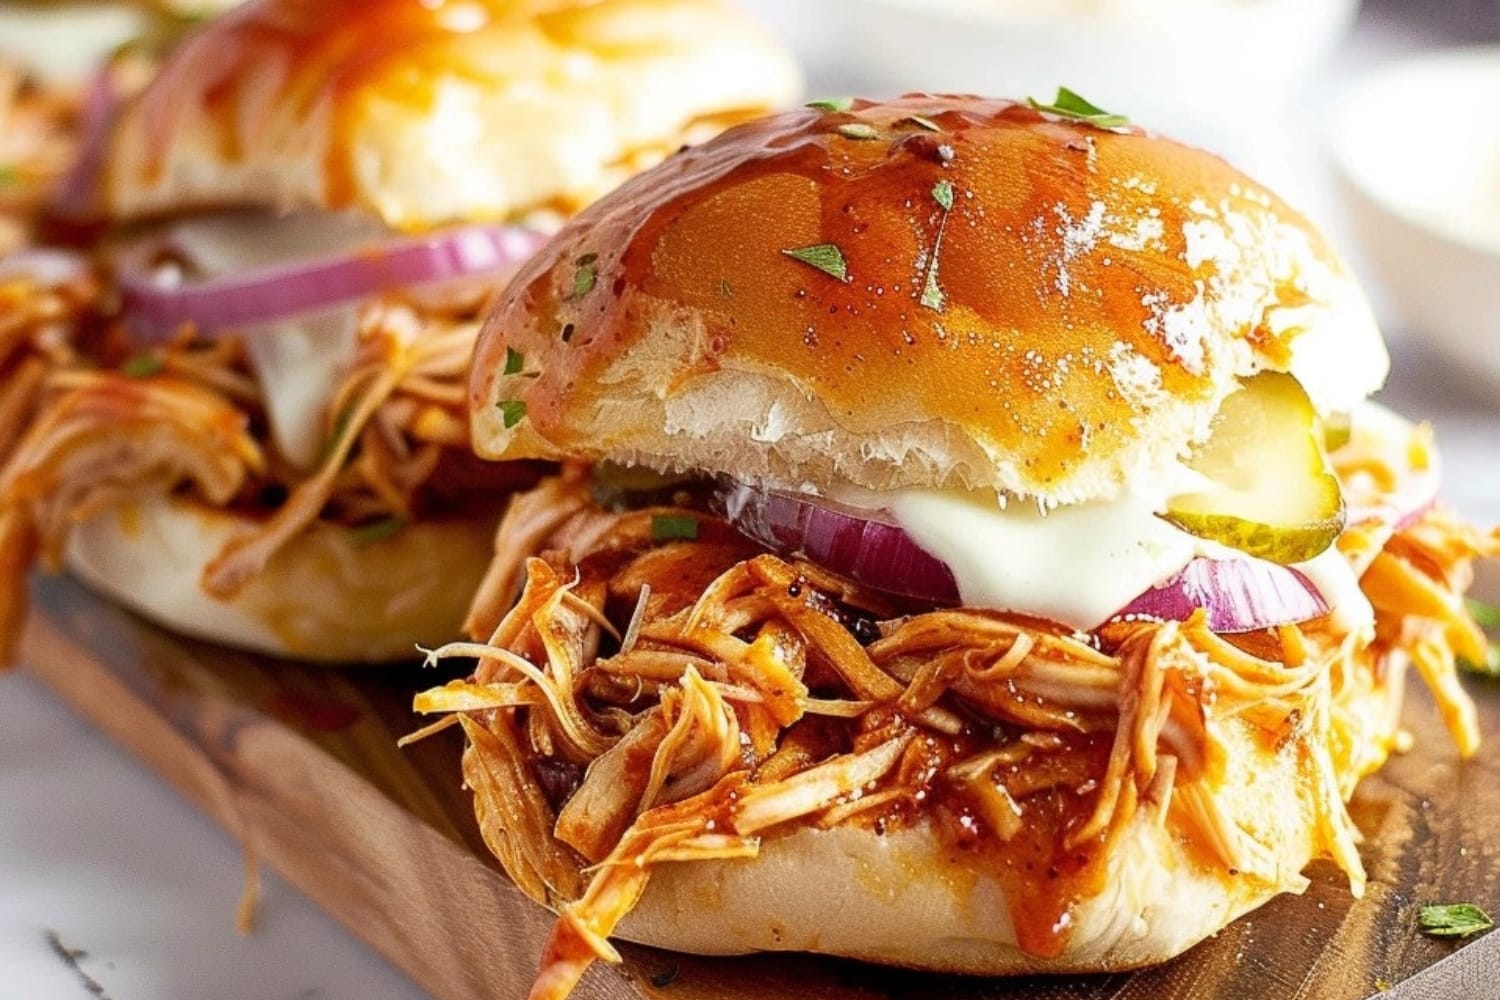 BBQ chicken sliders with melted cheese on a wooden board.